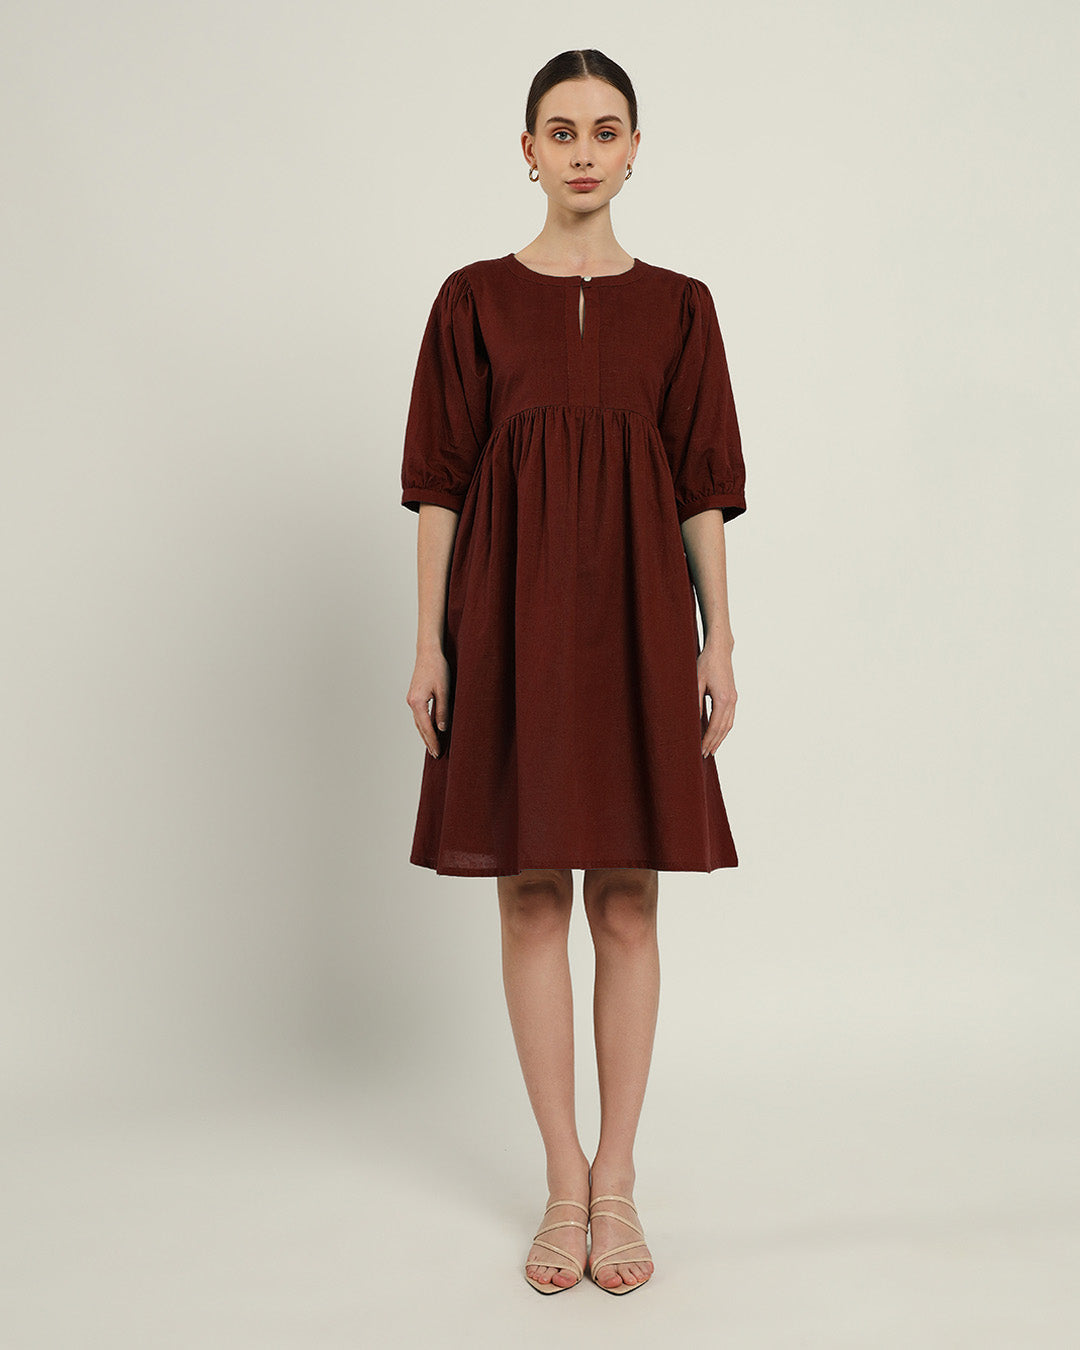 The Aira Rouge Dress